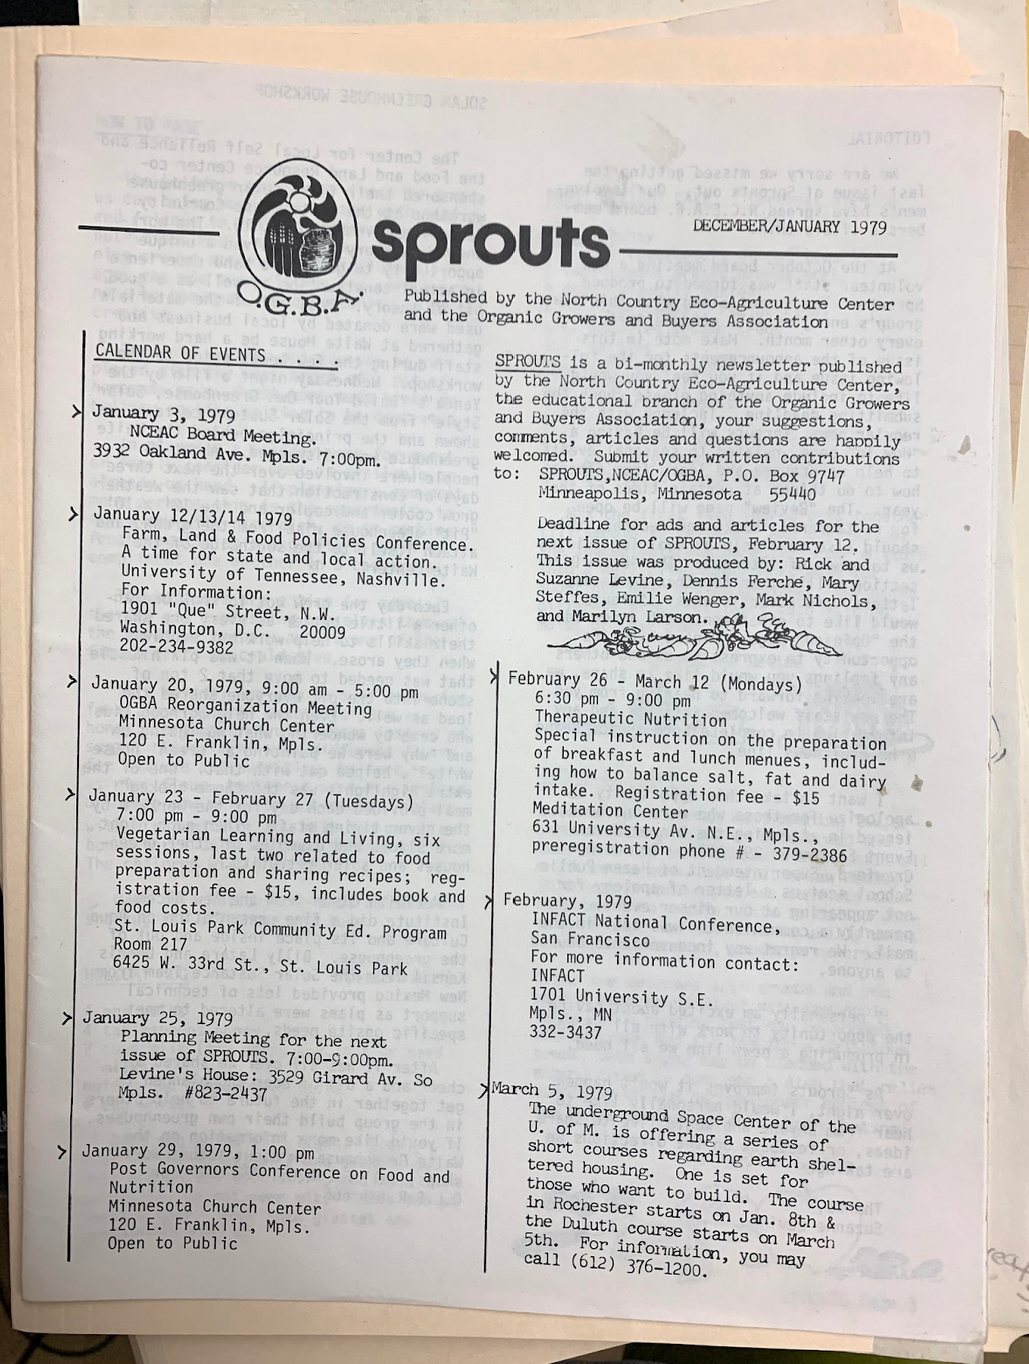 S.P.R.O.U.T.S 1979 newsletter Published by the NCEAC (North Country Eco-Agriculture Center) and the OGBA (Organic Growers and Buyers Association.